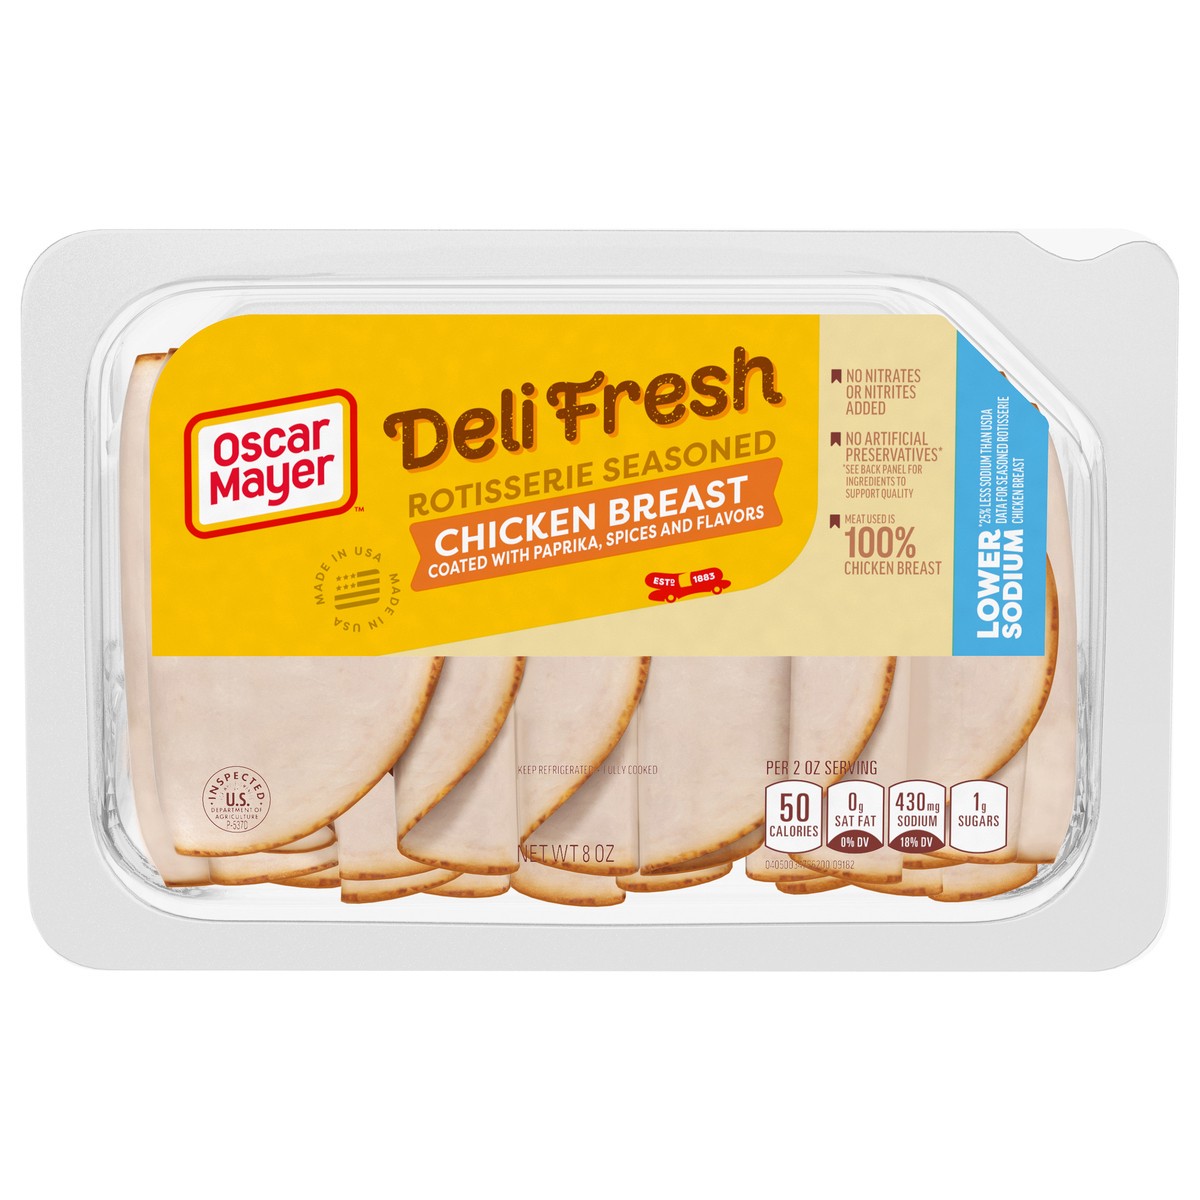 slide 1 of 5, Oscar Mayer Deli Fresh Rotisserie Seasoned Chicken Breast Coated with Paprika and Spices Sliced Lunch Meat with 25% Lower Sodium, 8 oz. Tray, 8 oz